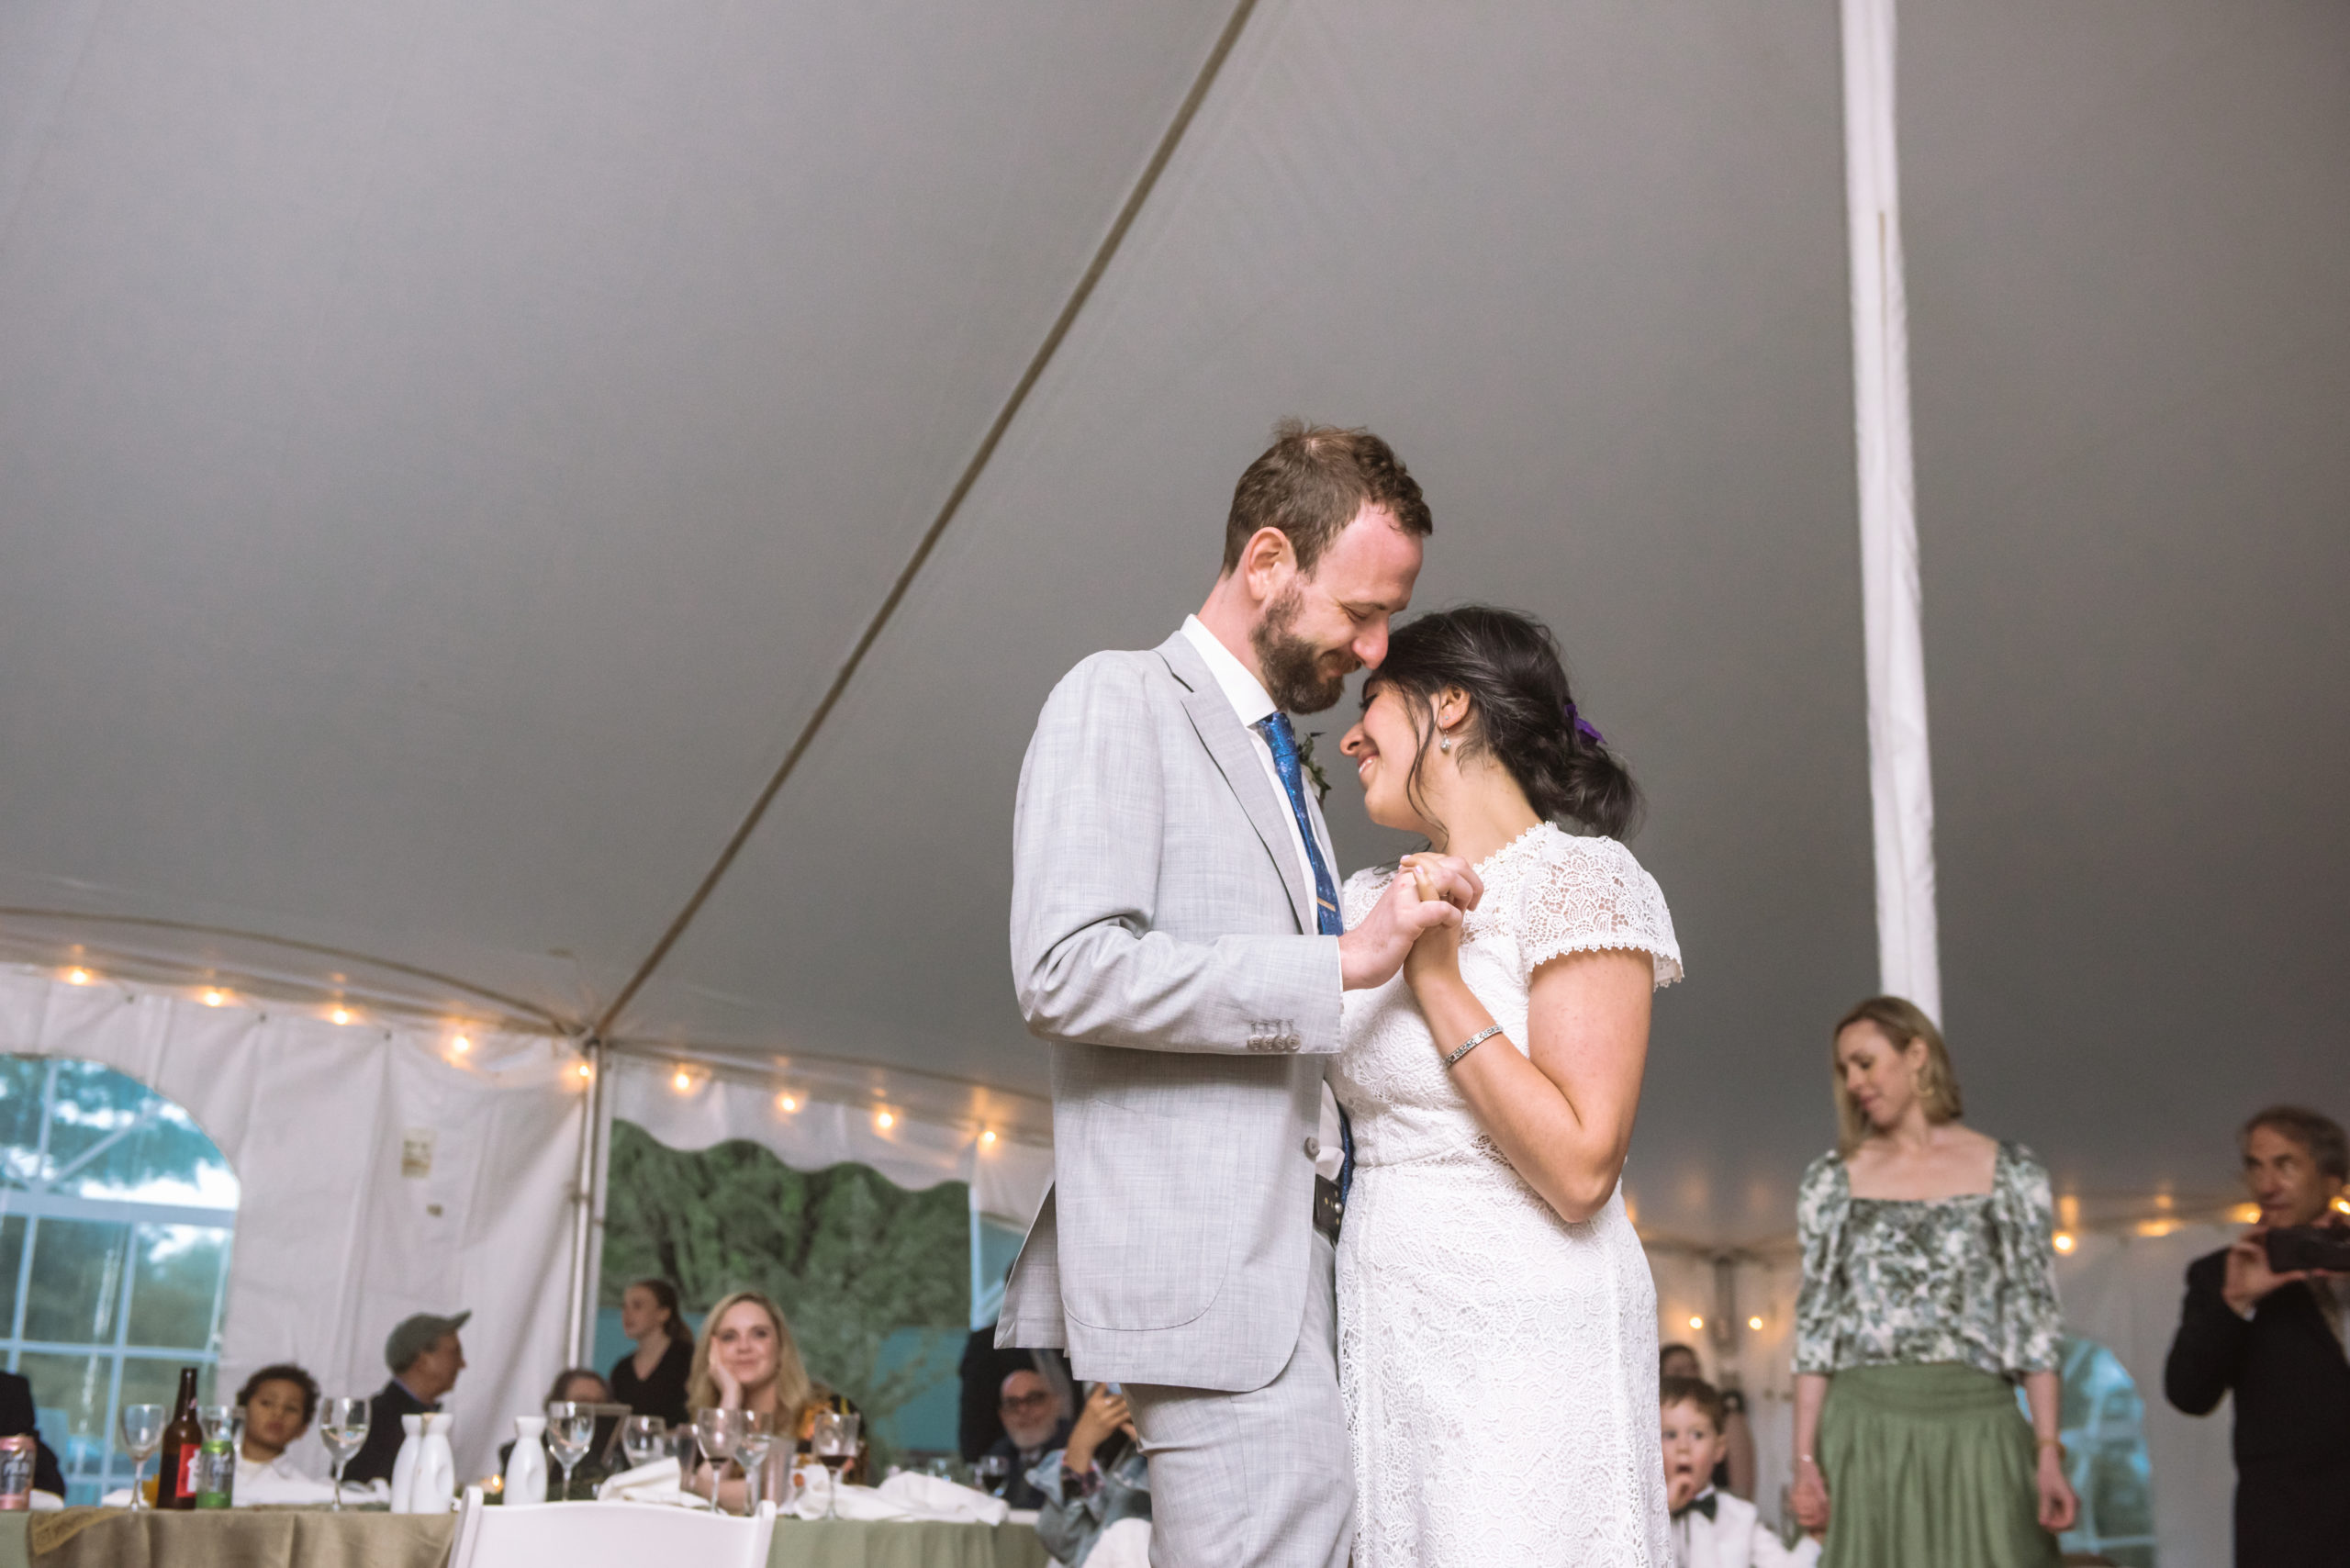 The newly married couple slow dancing during their reception. They are embracing face to face with the arms around each other and holding hands. Both have their eyes closed and are smiling in a tender moment. There are wedding guests in the background.